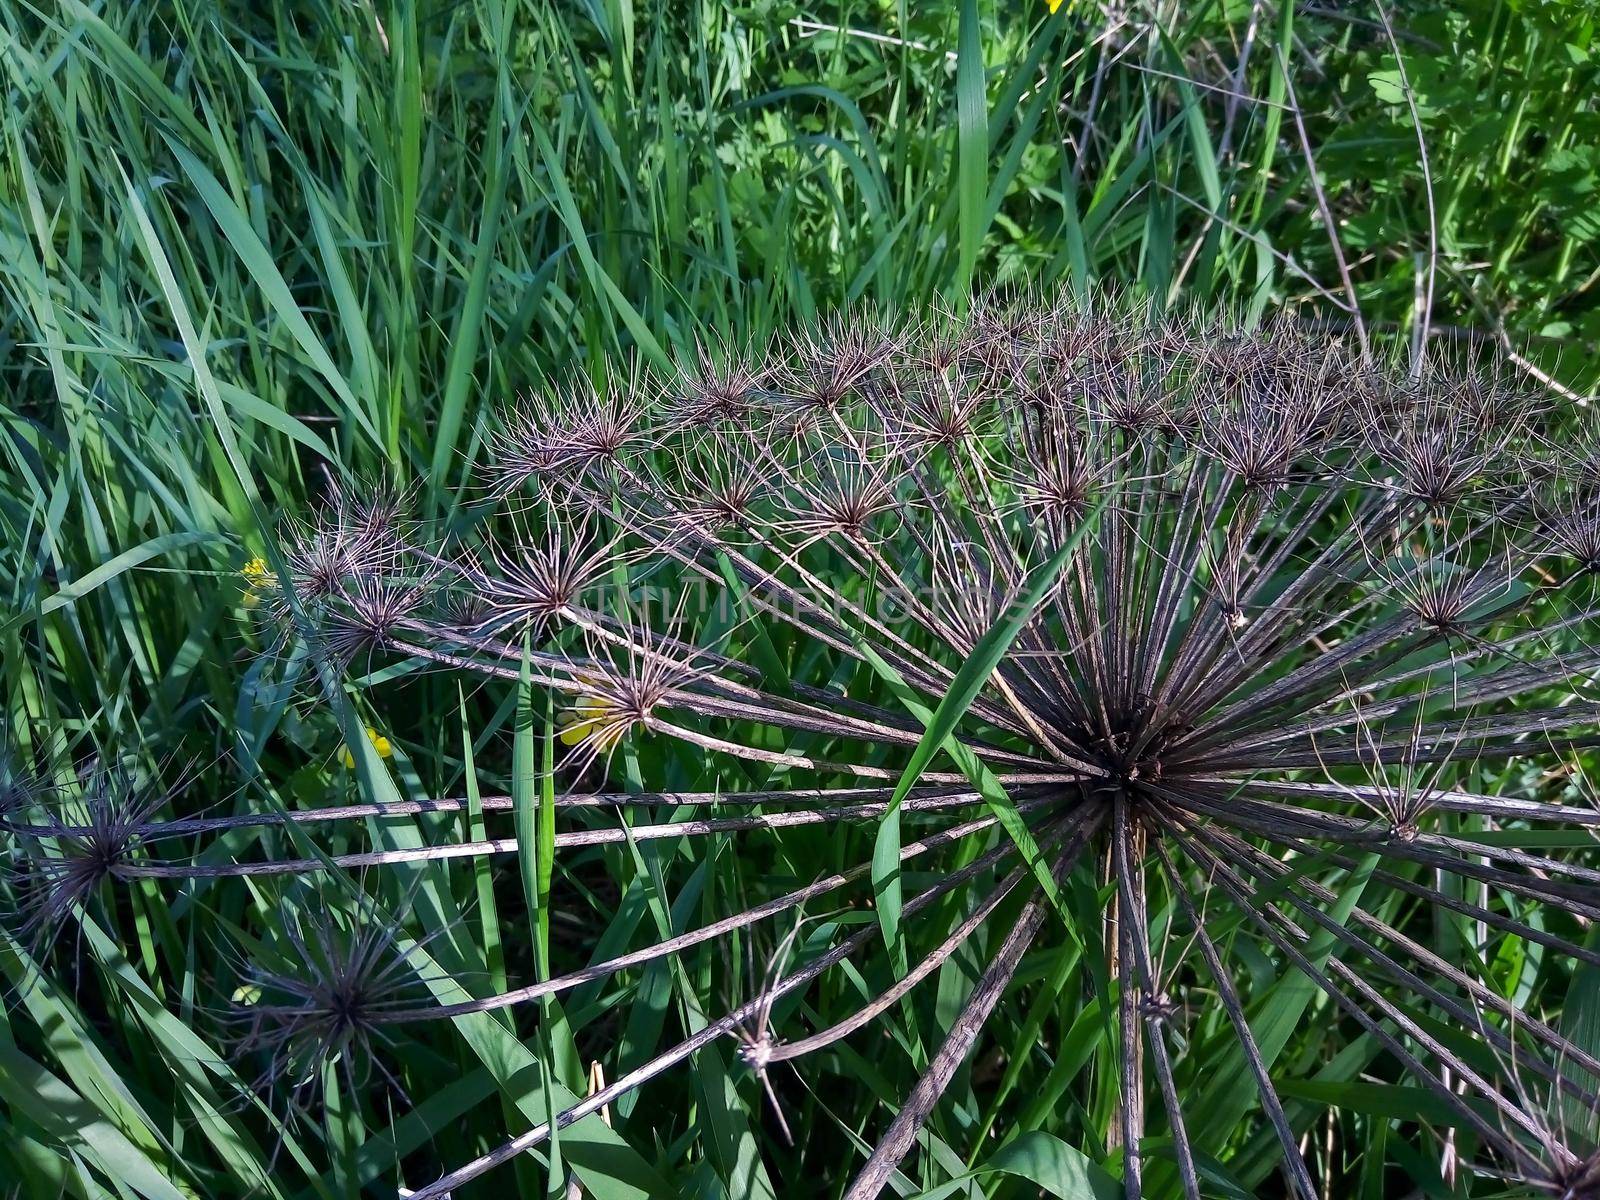 Giant dry hogweed, parsnip on the background of green grass.